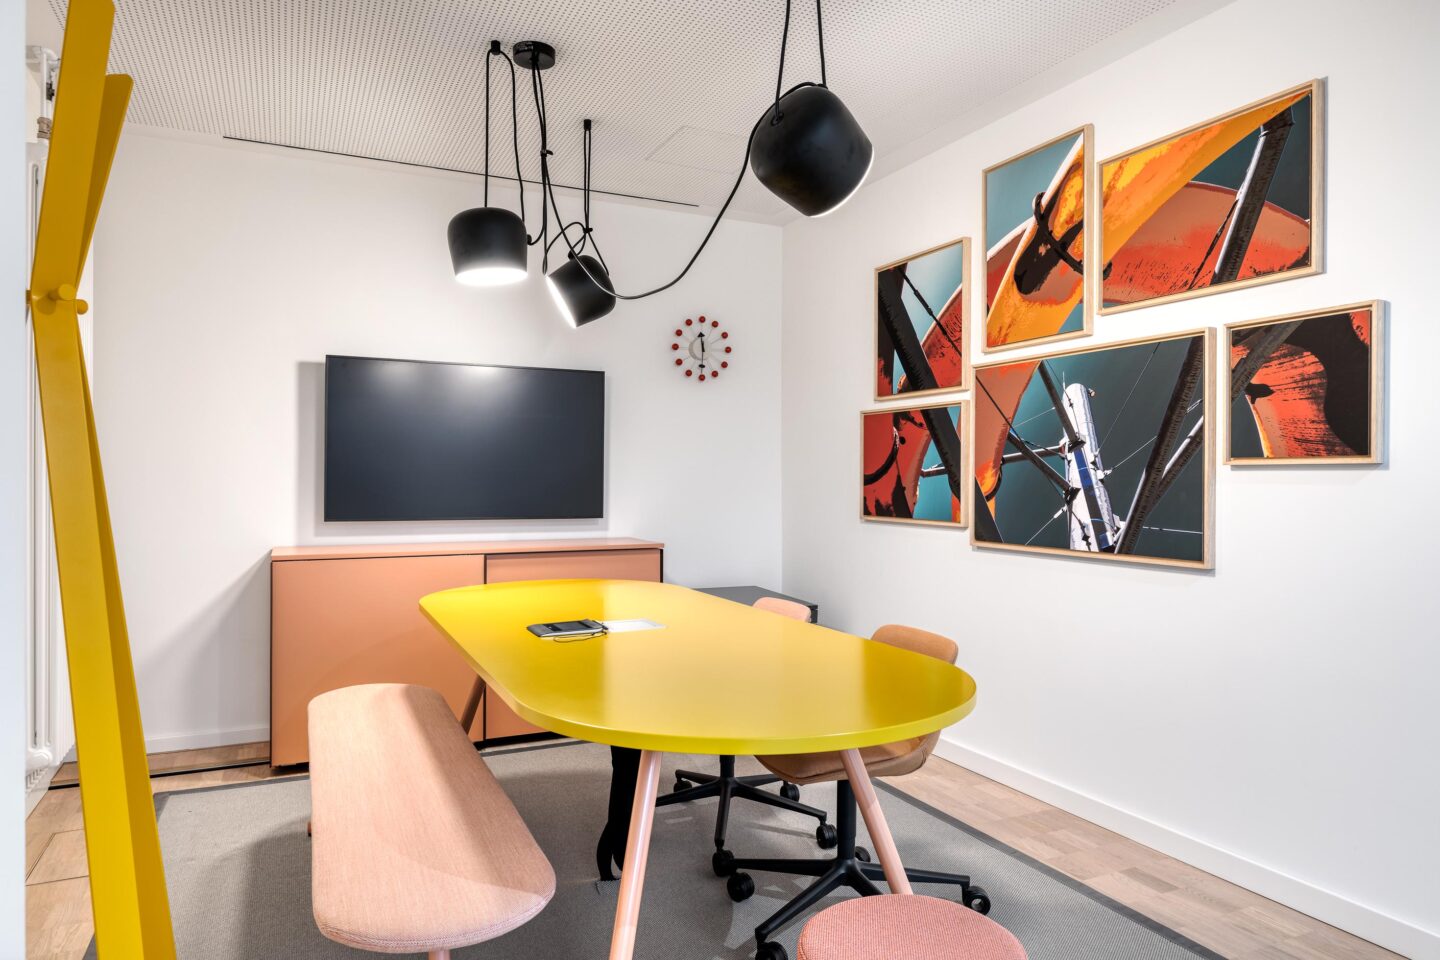 Sparkasse Karlsruhe │ new workplace concept │ agile work